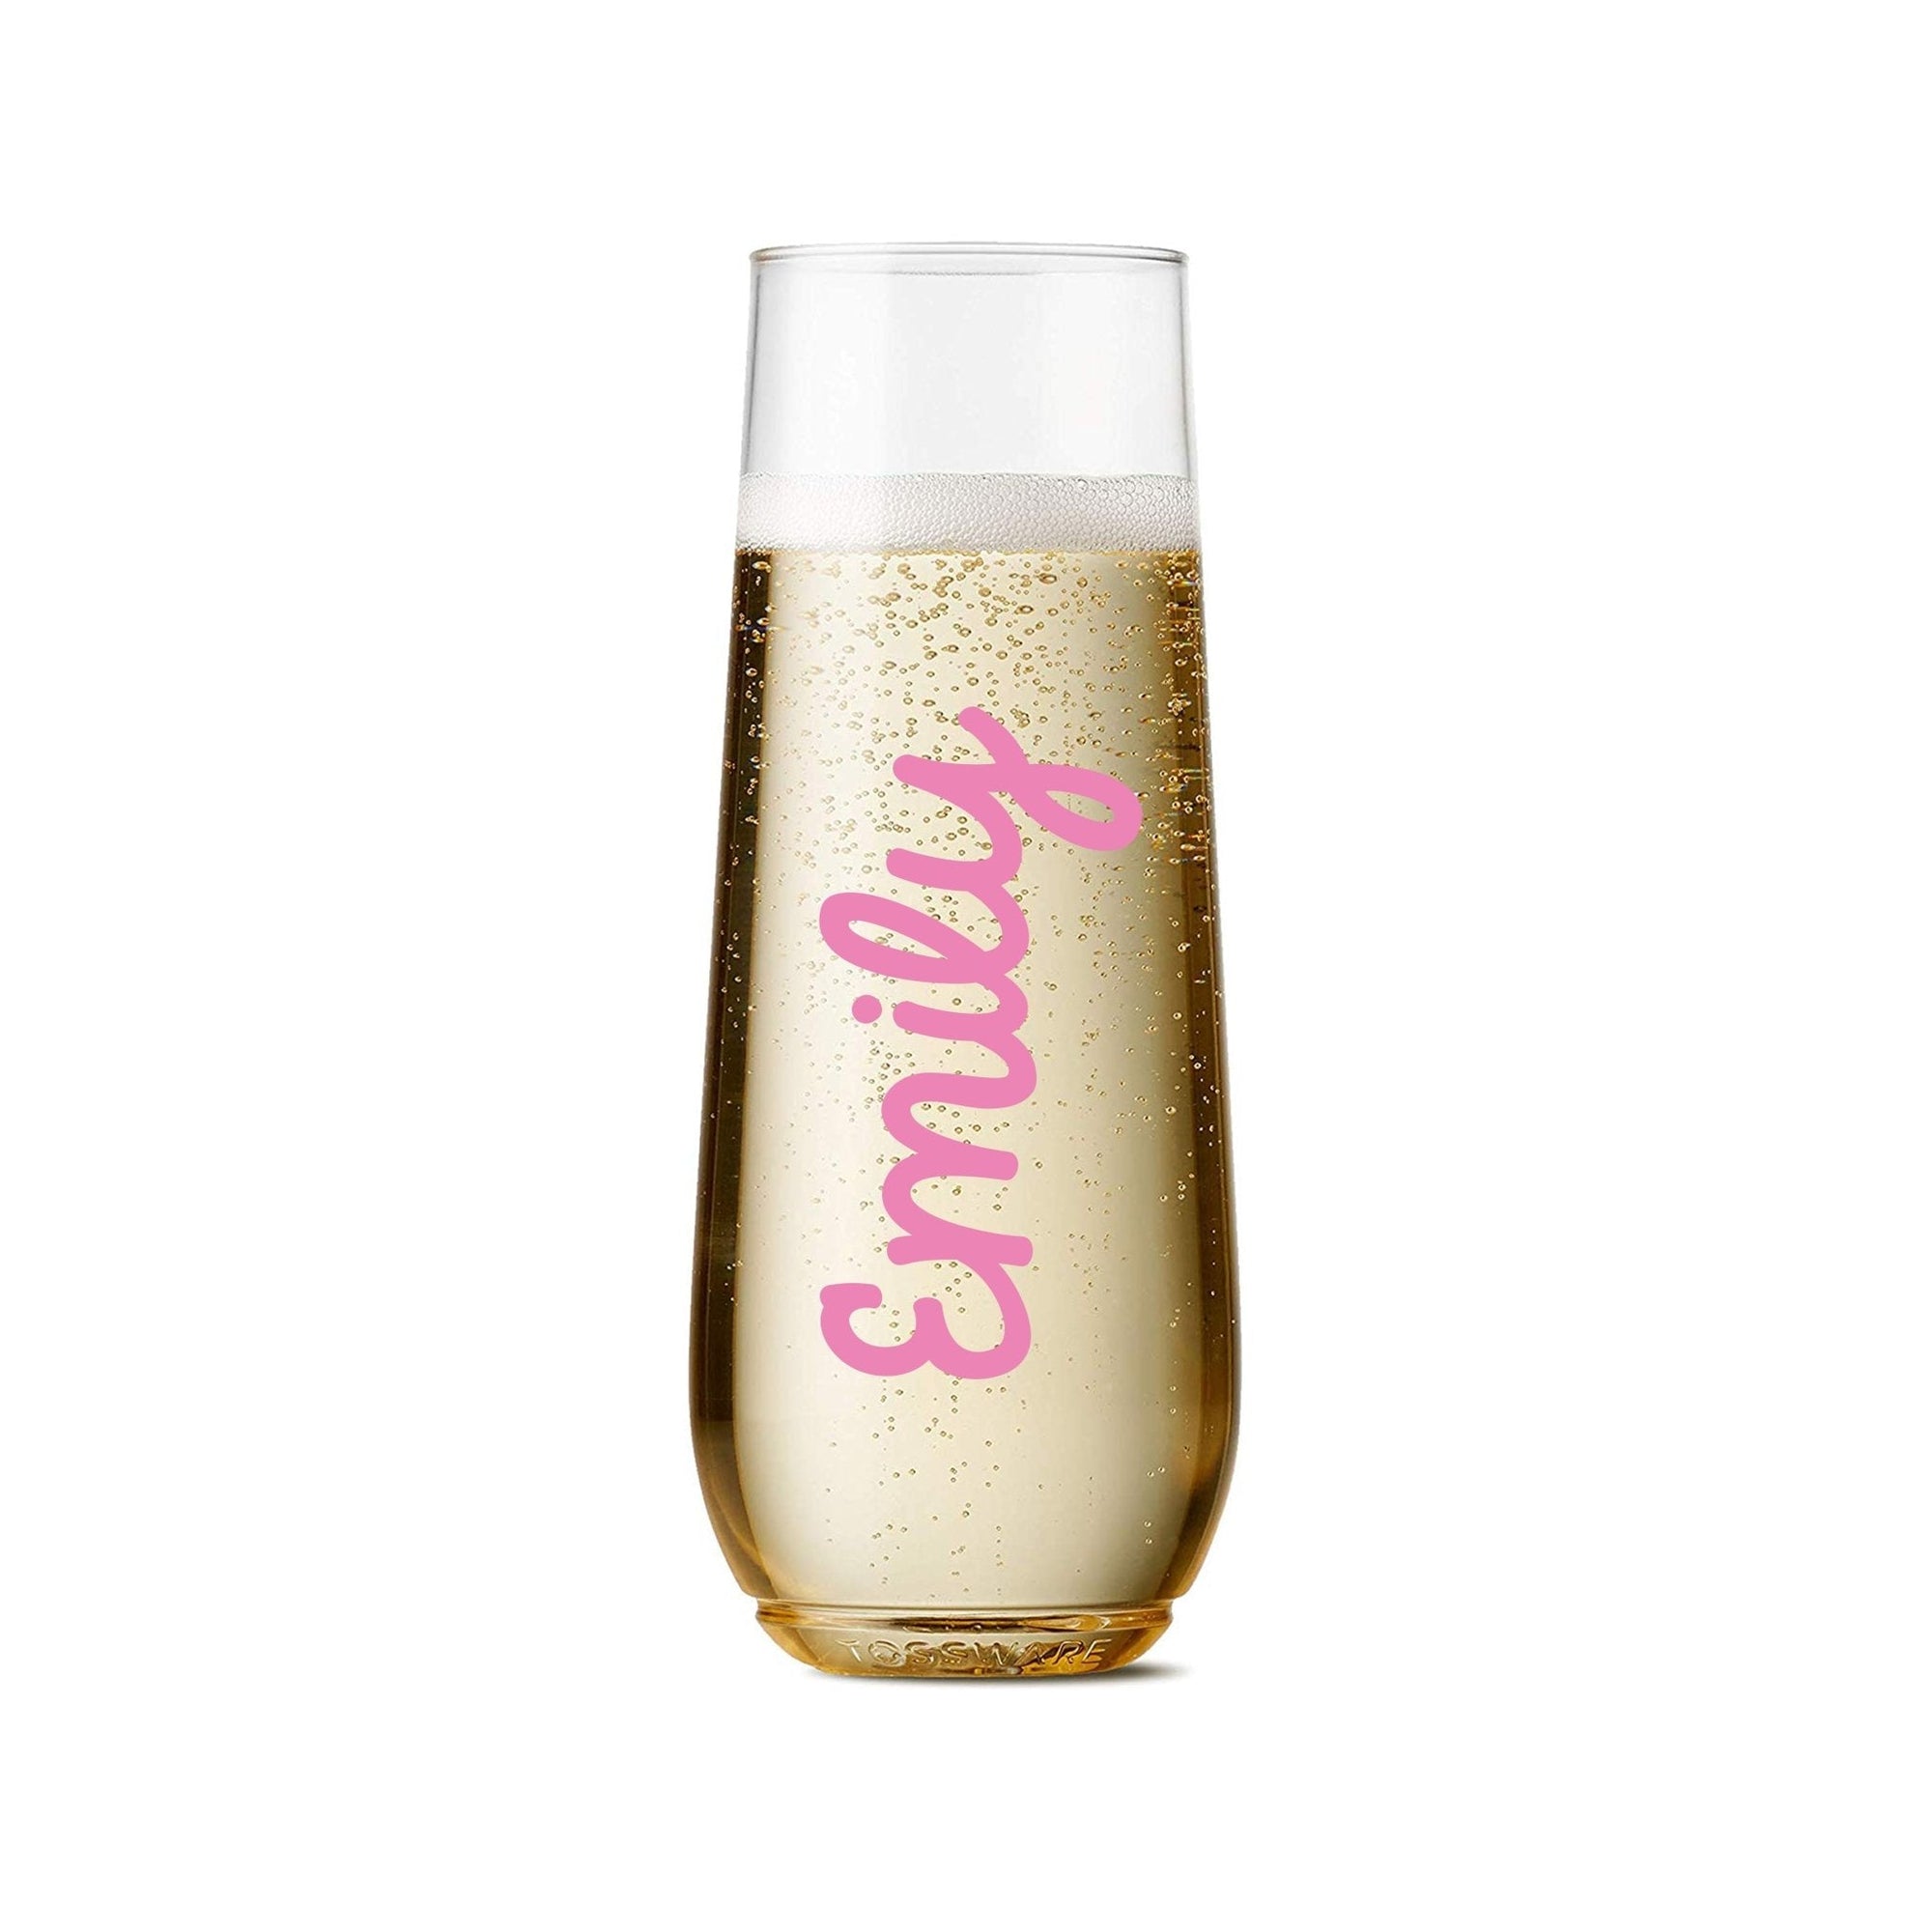 A champagne flute is customized with a name in a script gold font.